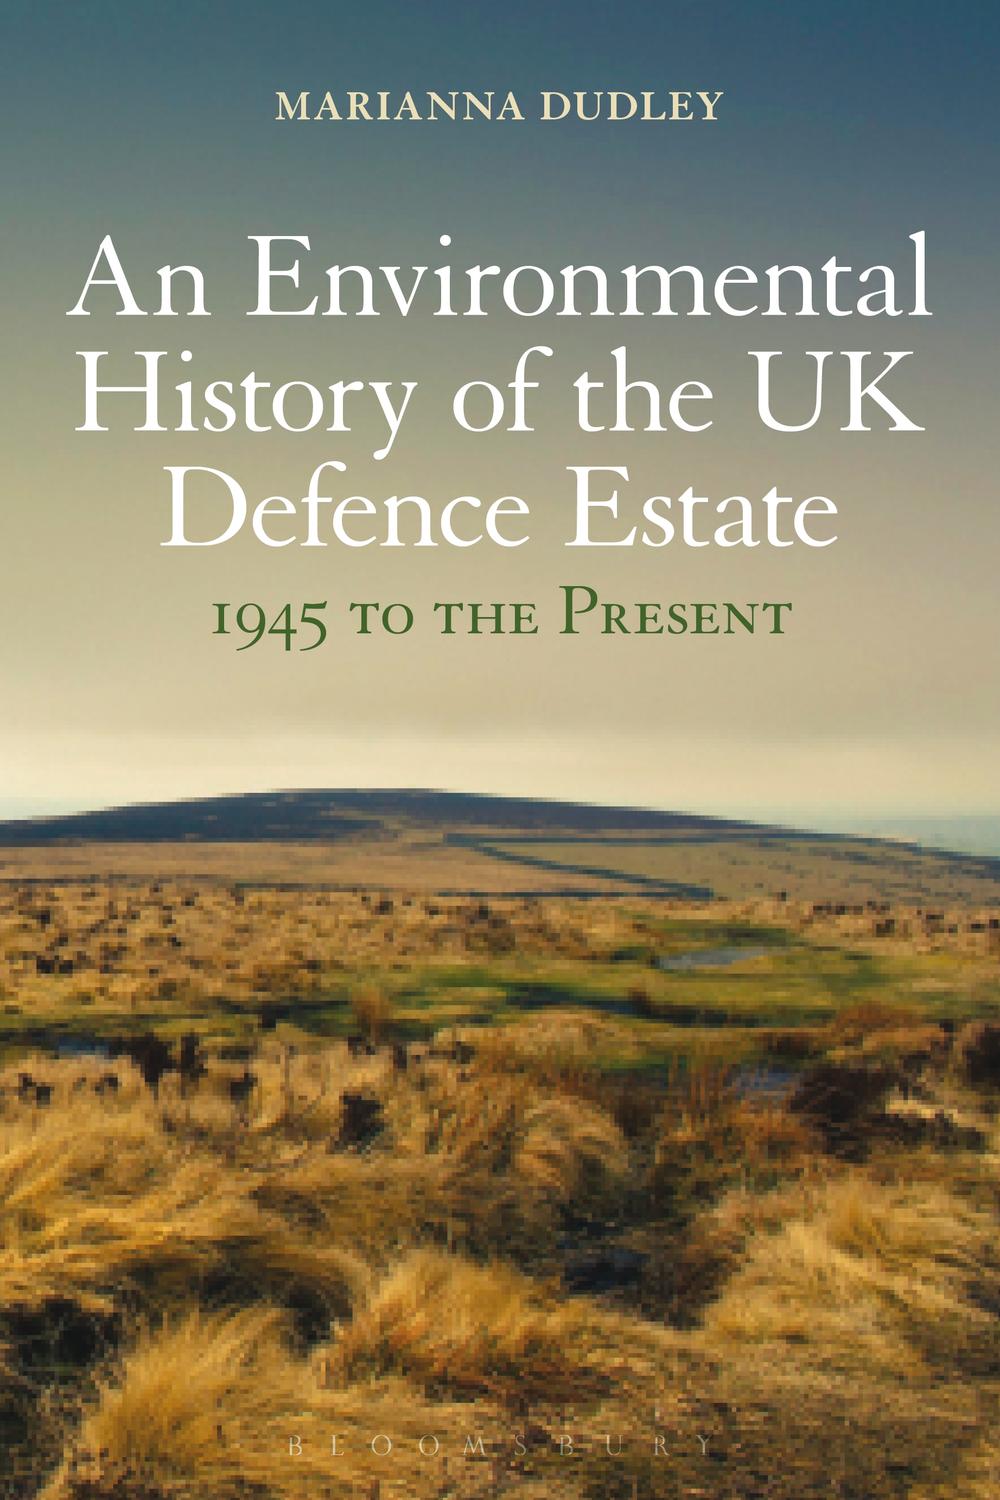 An Environmental History of the UK Defence Estate, 1945 to the Present - Marianna Dudley